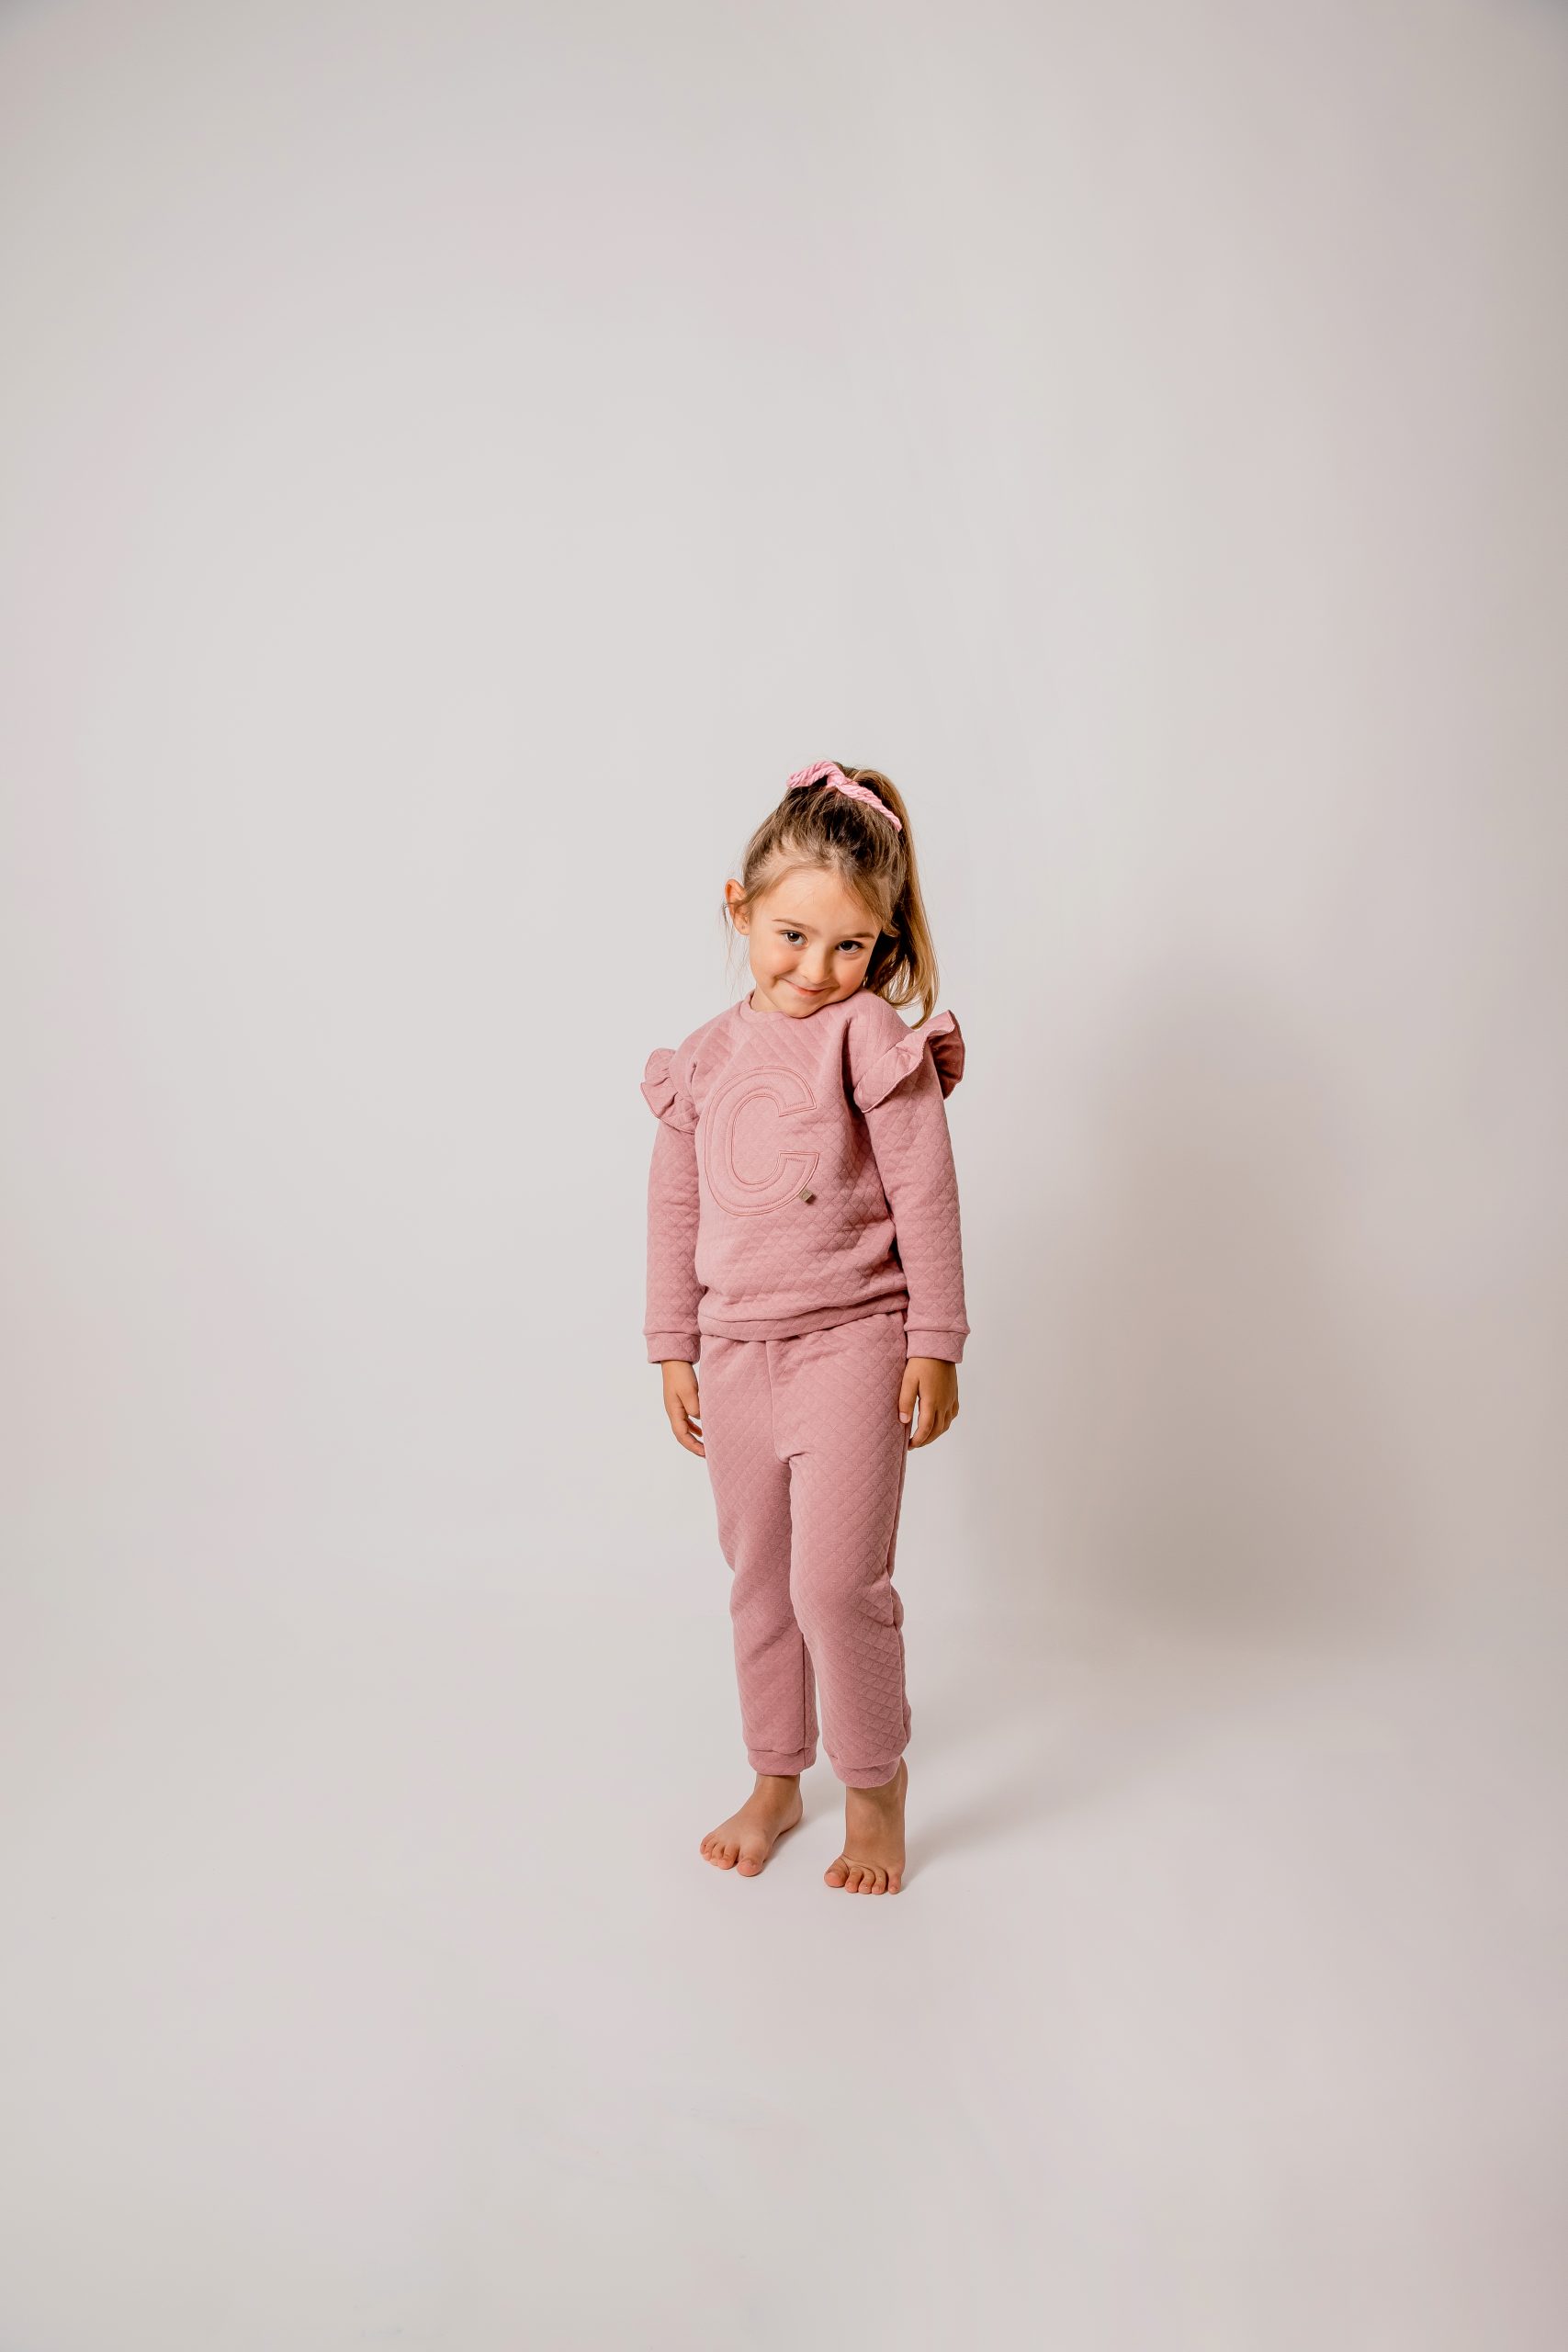 Buy Striped Women Track Suit Online In India At Discounted Prices